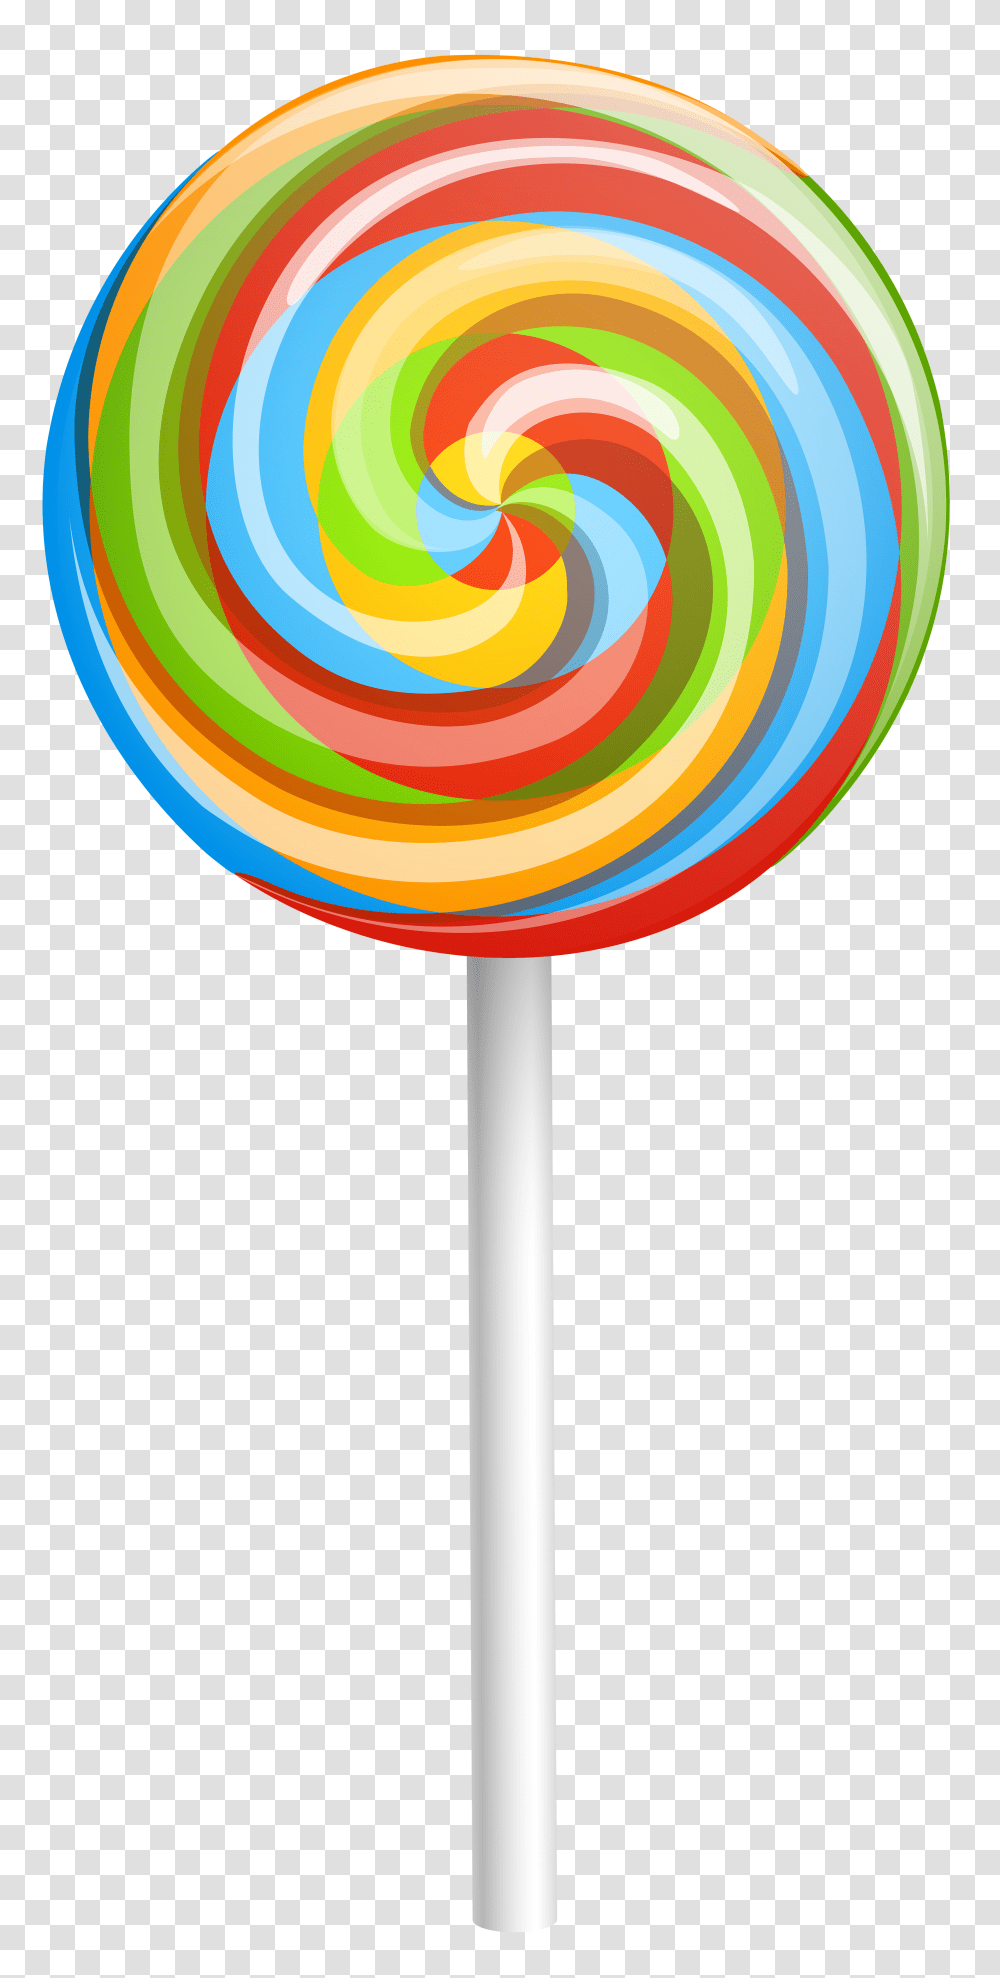 Candies 1 Image Lollipop, Sweets, Food, Confectionery, Candy Transparent Png